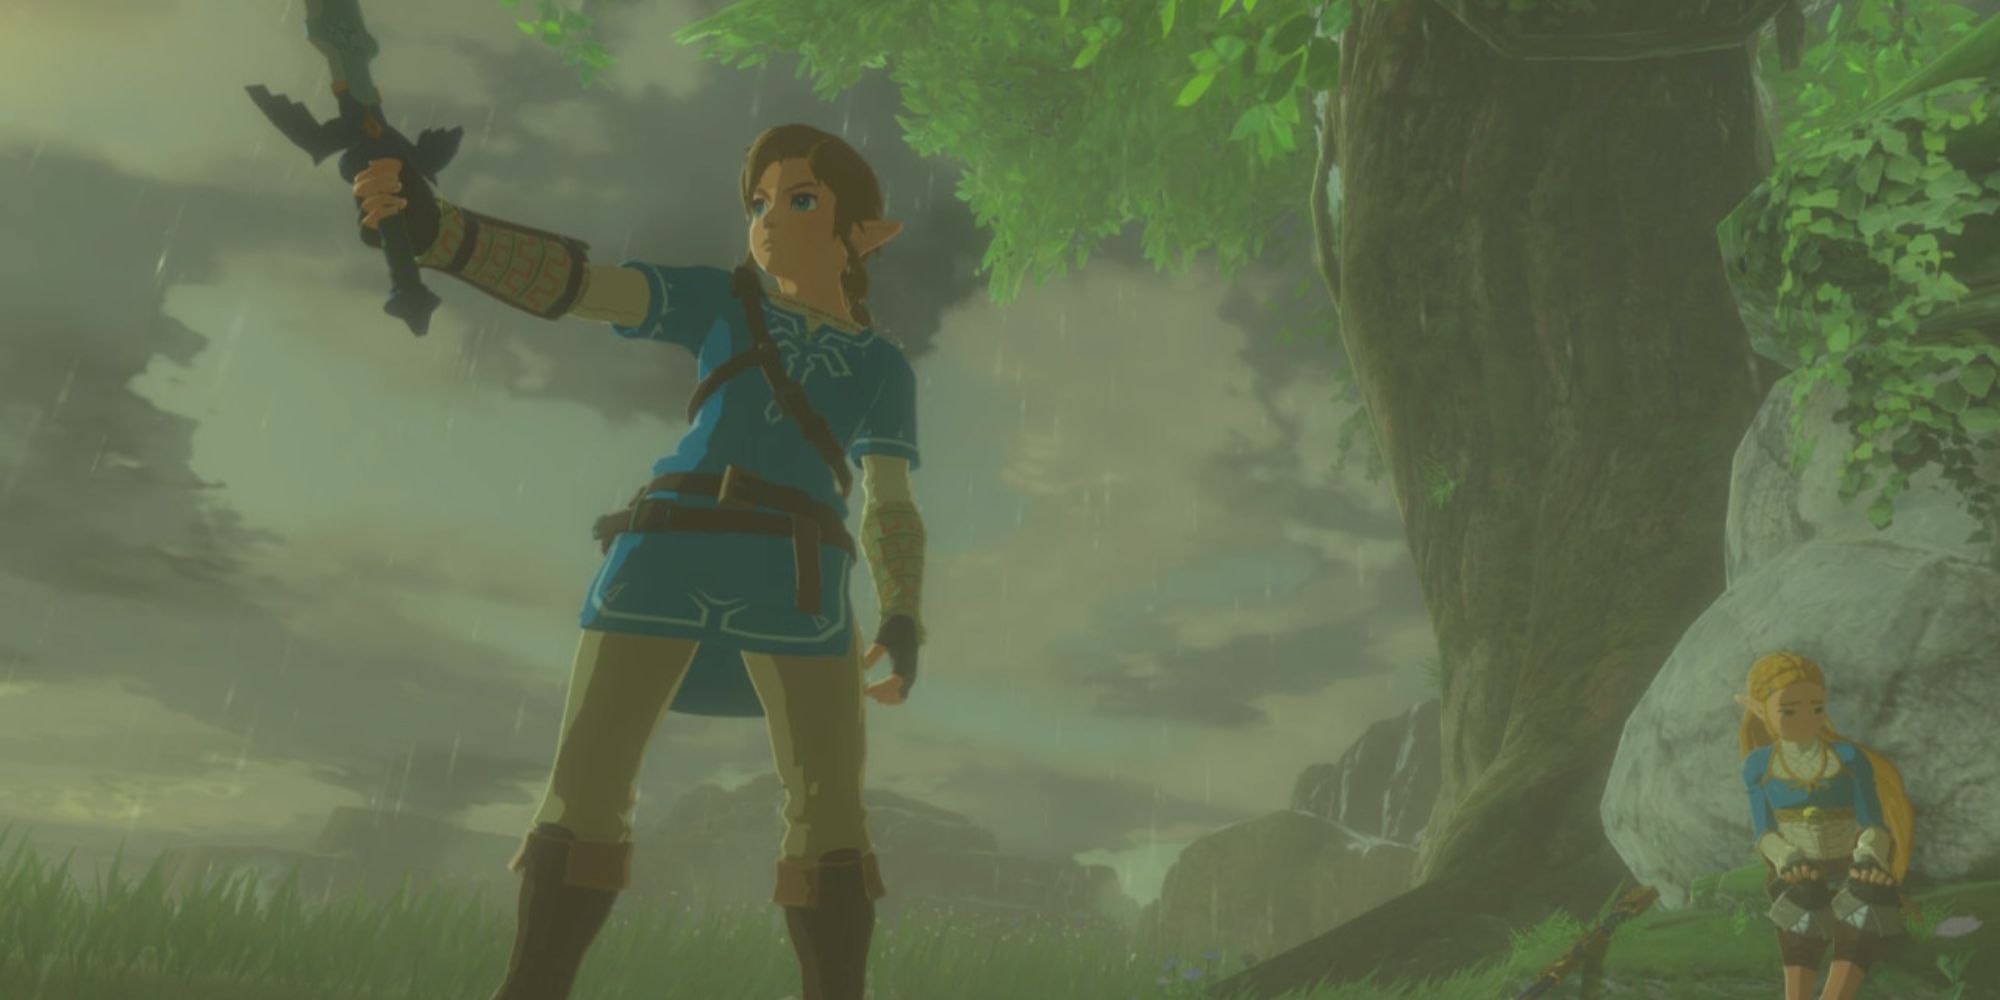 Link holds the Master Sword in the air while Zelda sits somberly by a rock